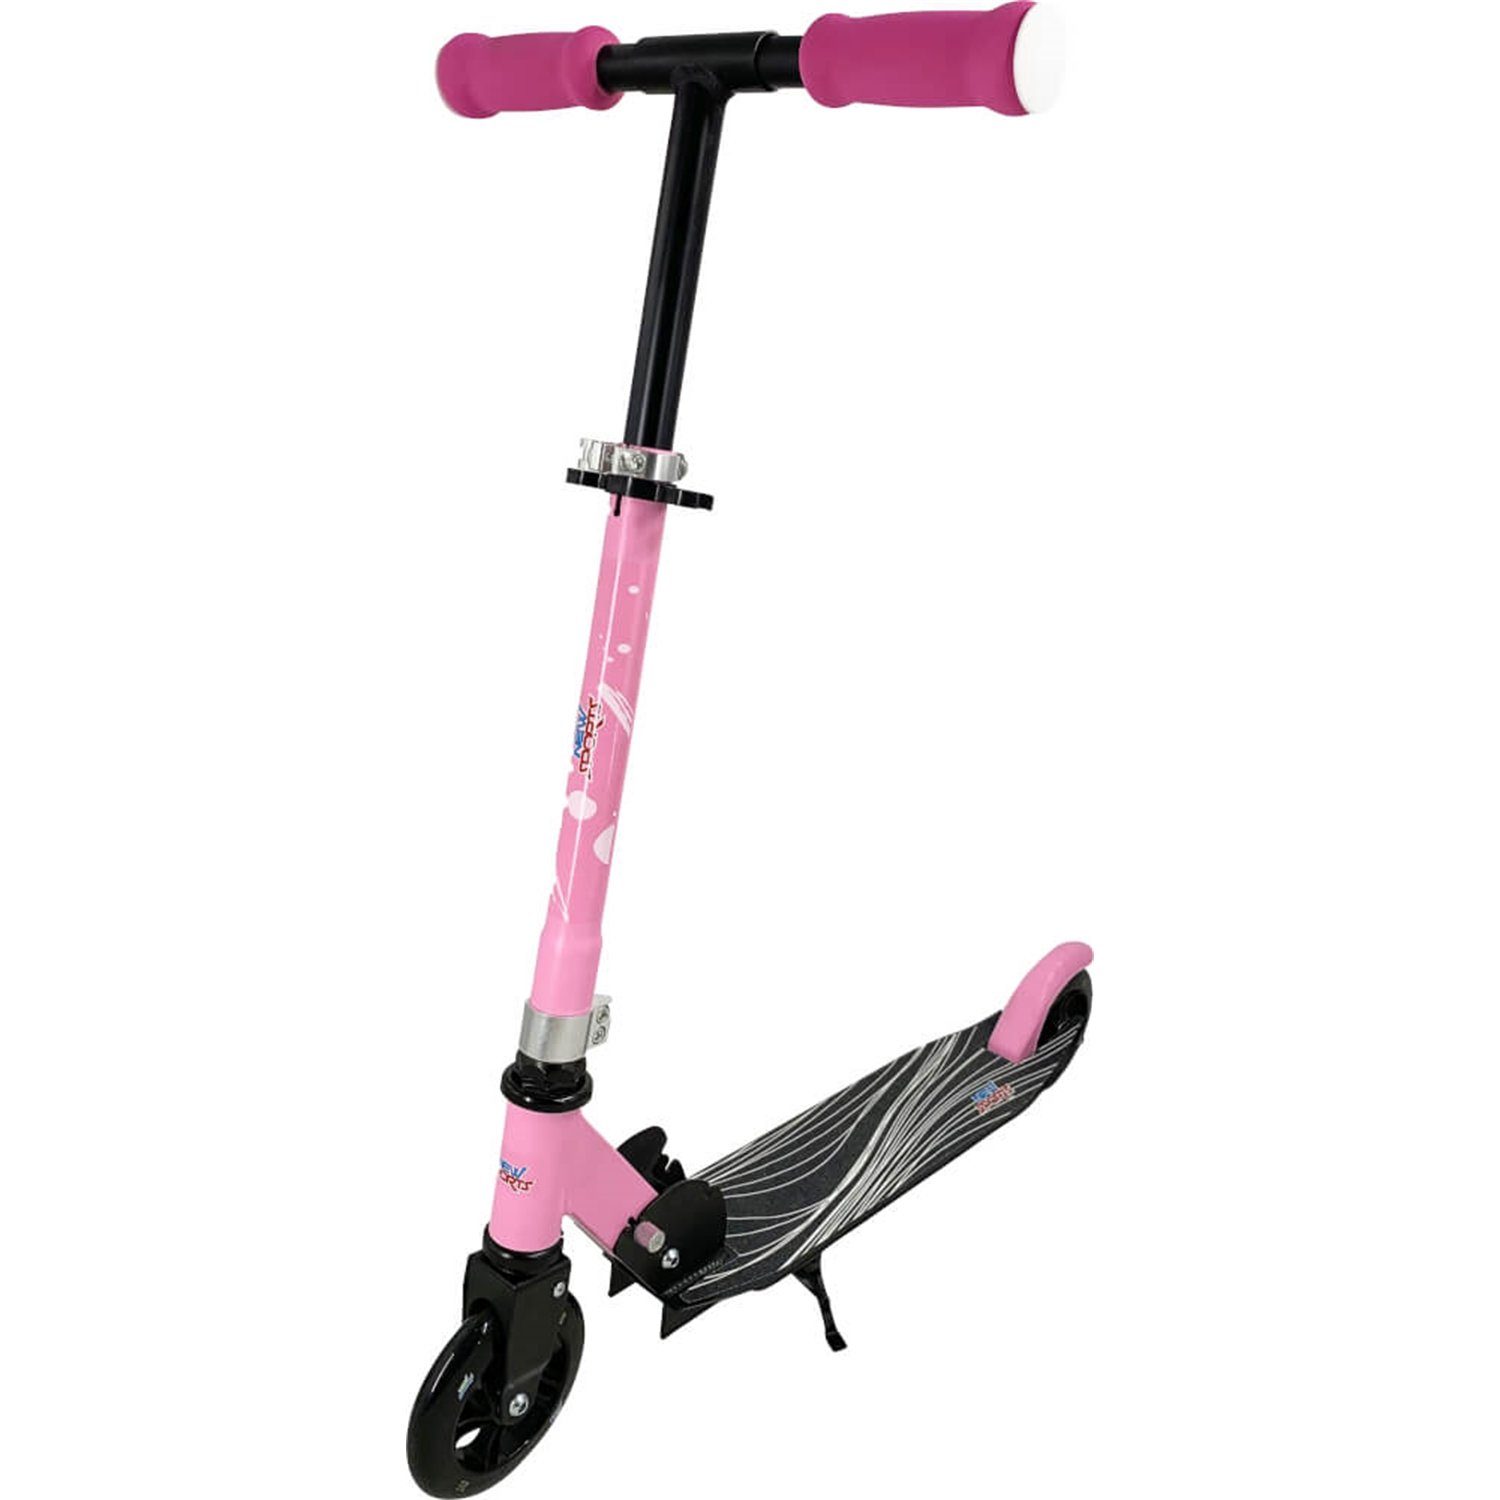 Scooter NSP 73423341 125mm Scooter Vedes pink/weiss